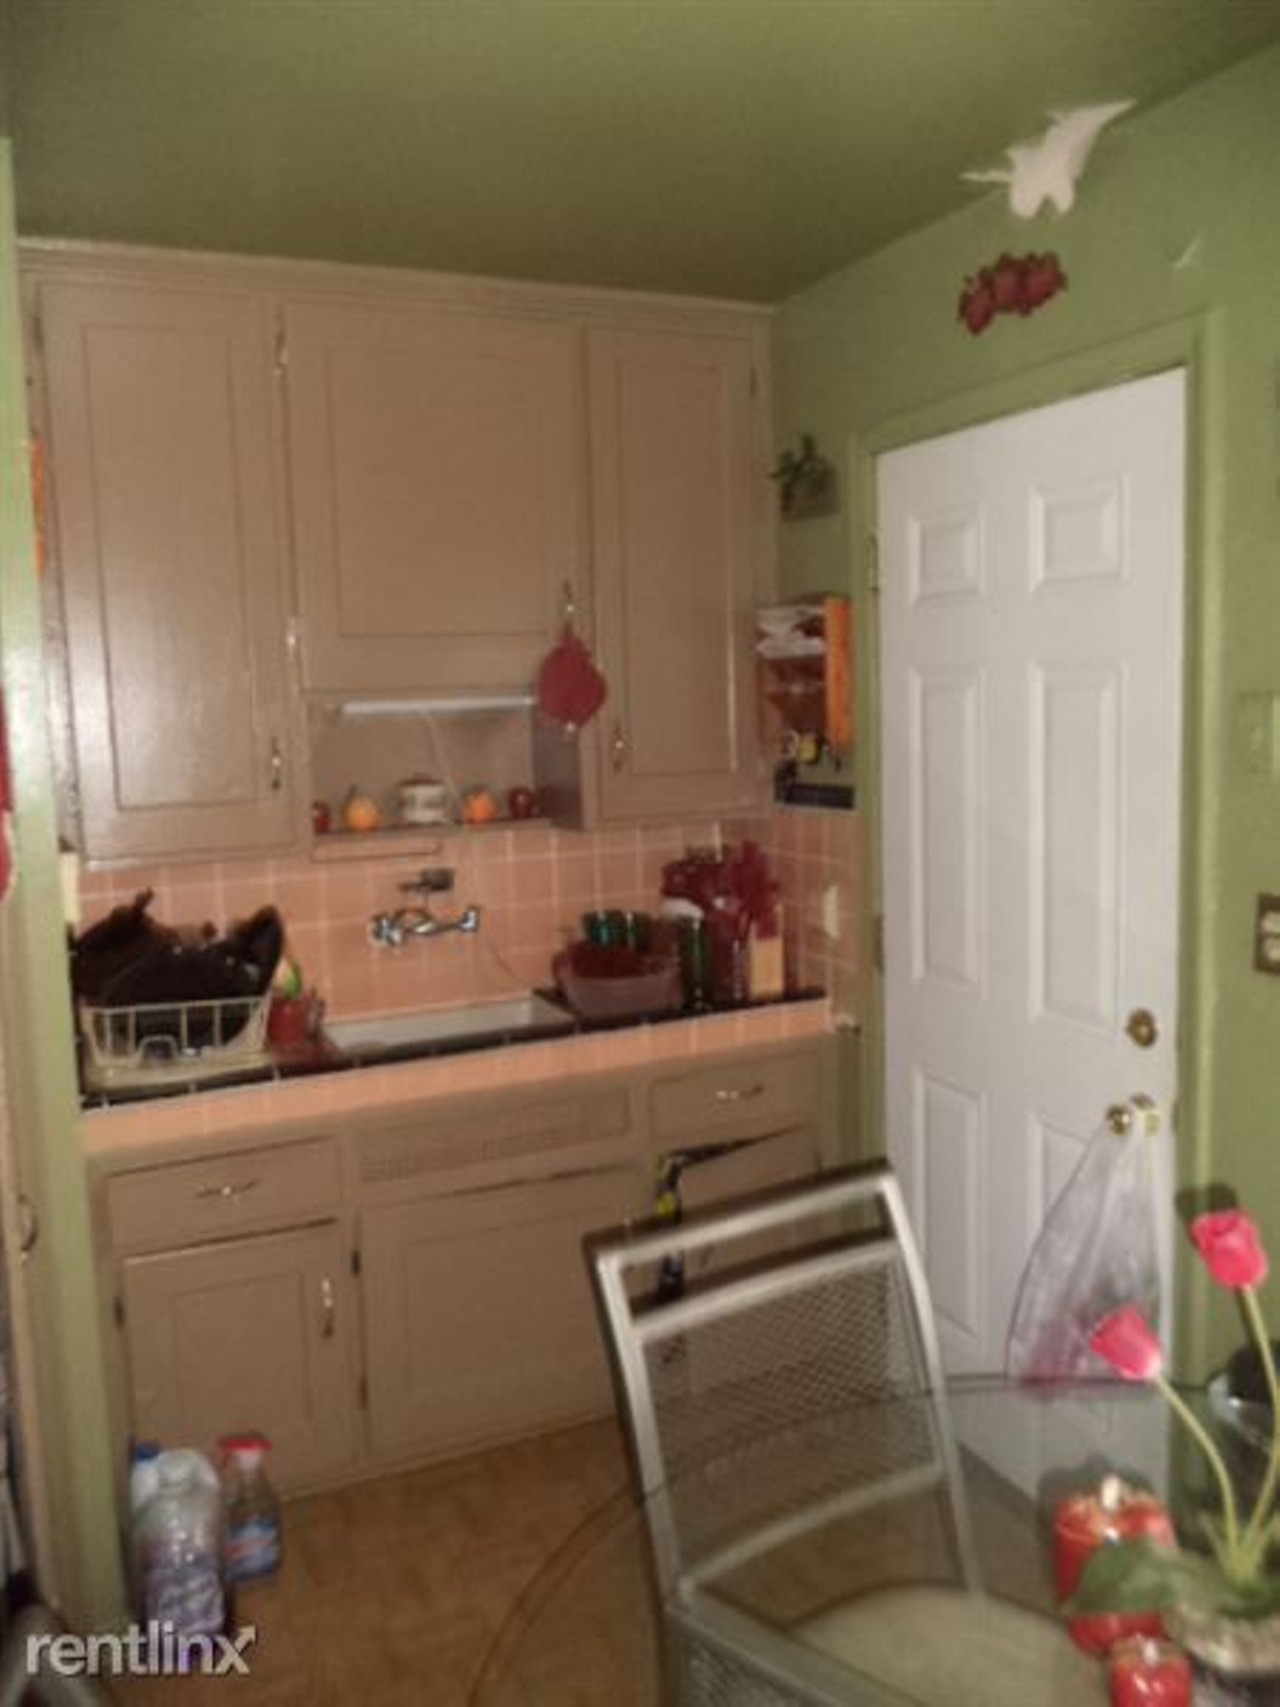 Hamtramck | $700/month | 3 bed, 1 bath 
17851 Wexford St.A kitchen/dining room perfect for intimate gatherings.